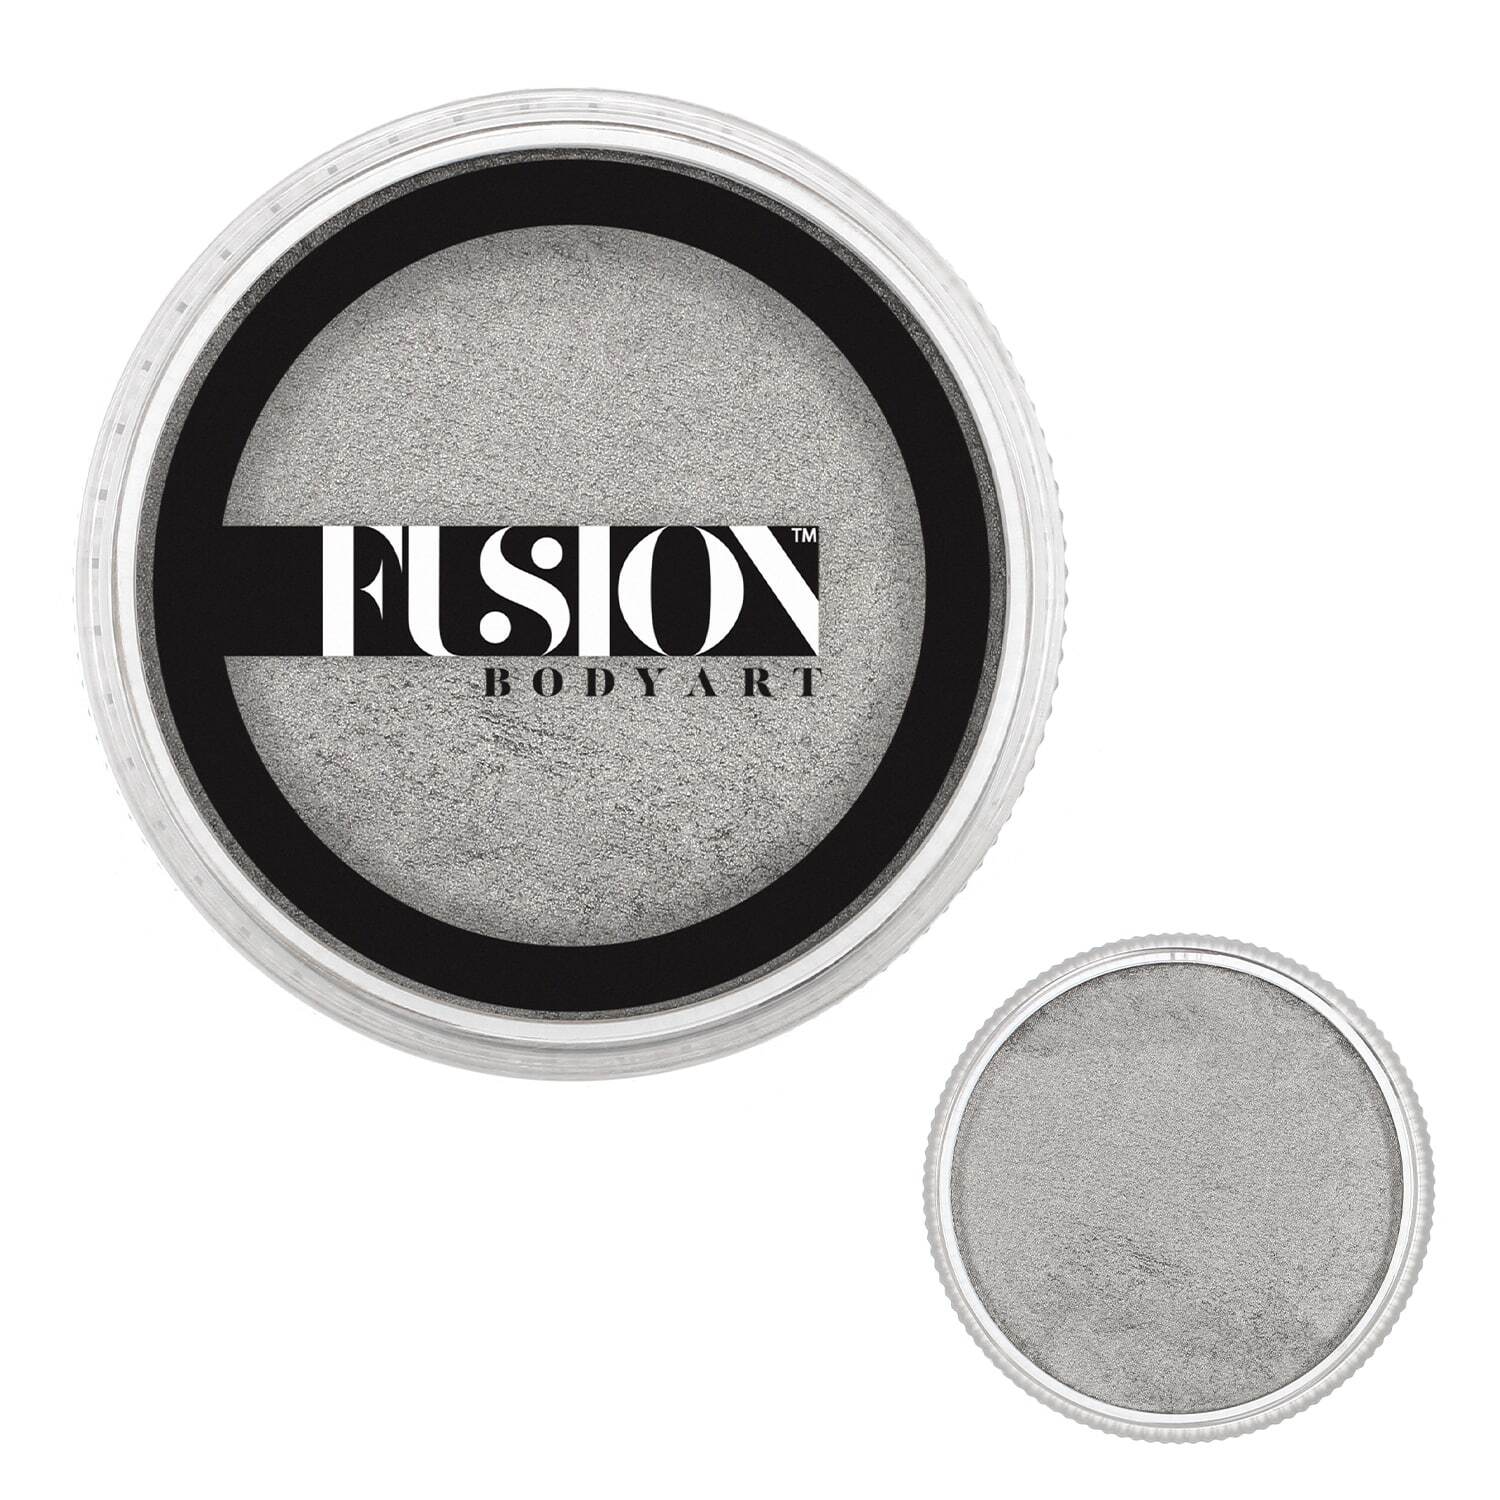 Fusion Body Art Face Paints - Pearl Metallic Silver 32g